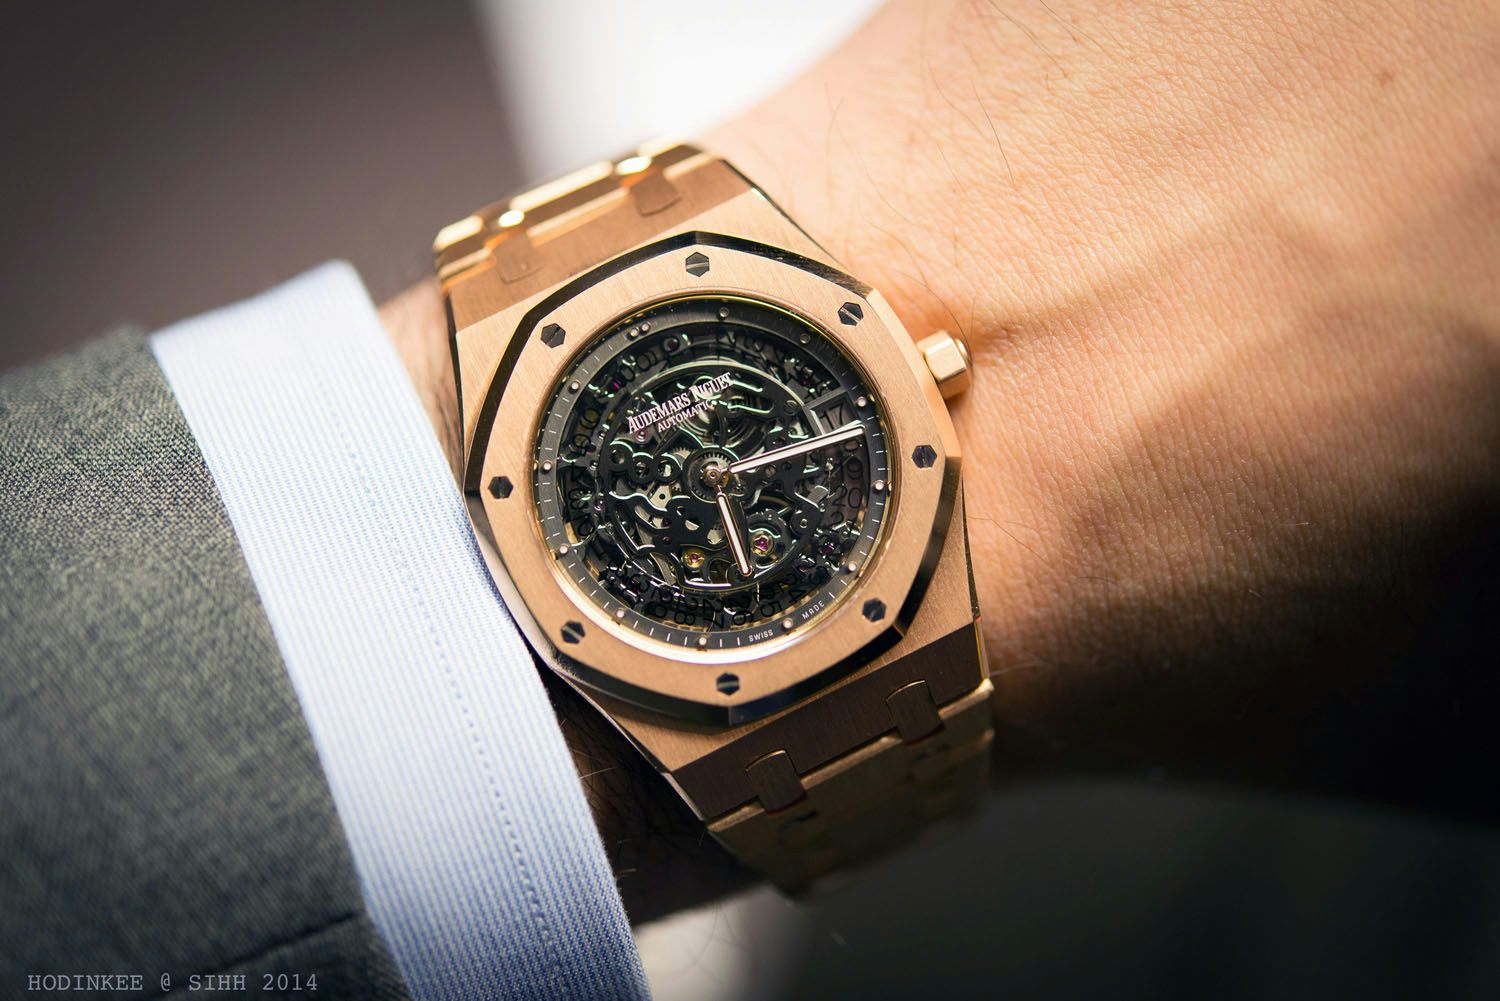 Hands-On: With The Audemars Piguet Royal Oak Openworked Extra-Thin